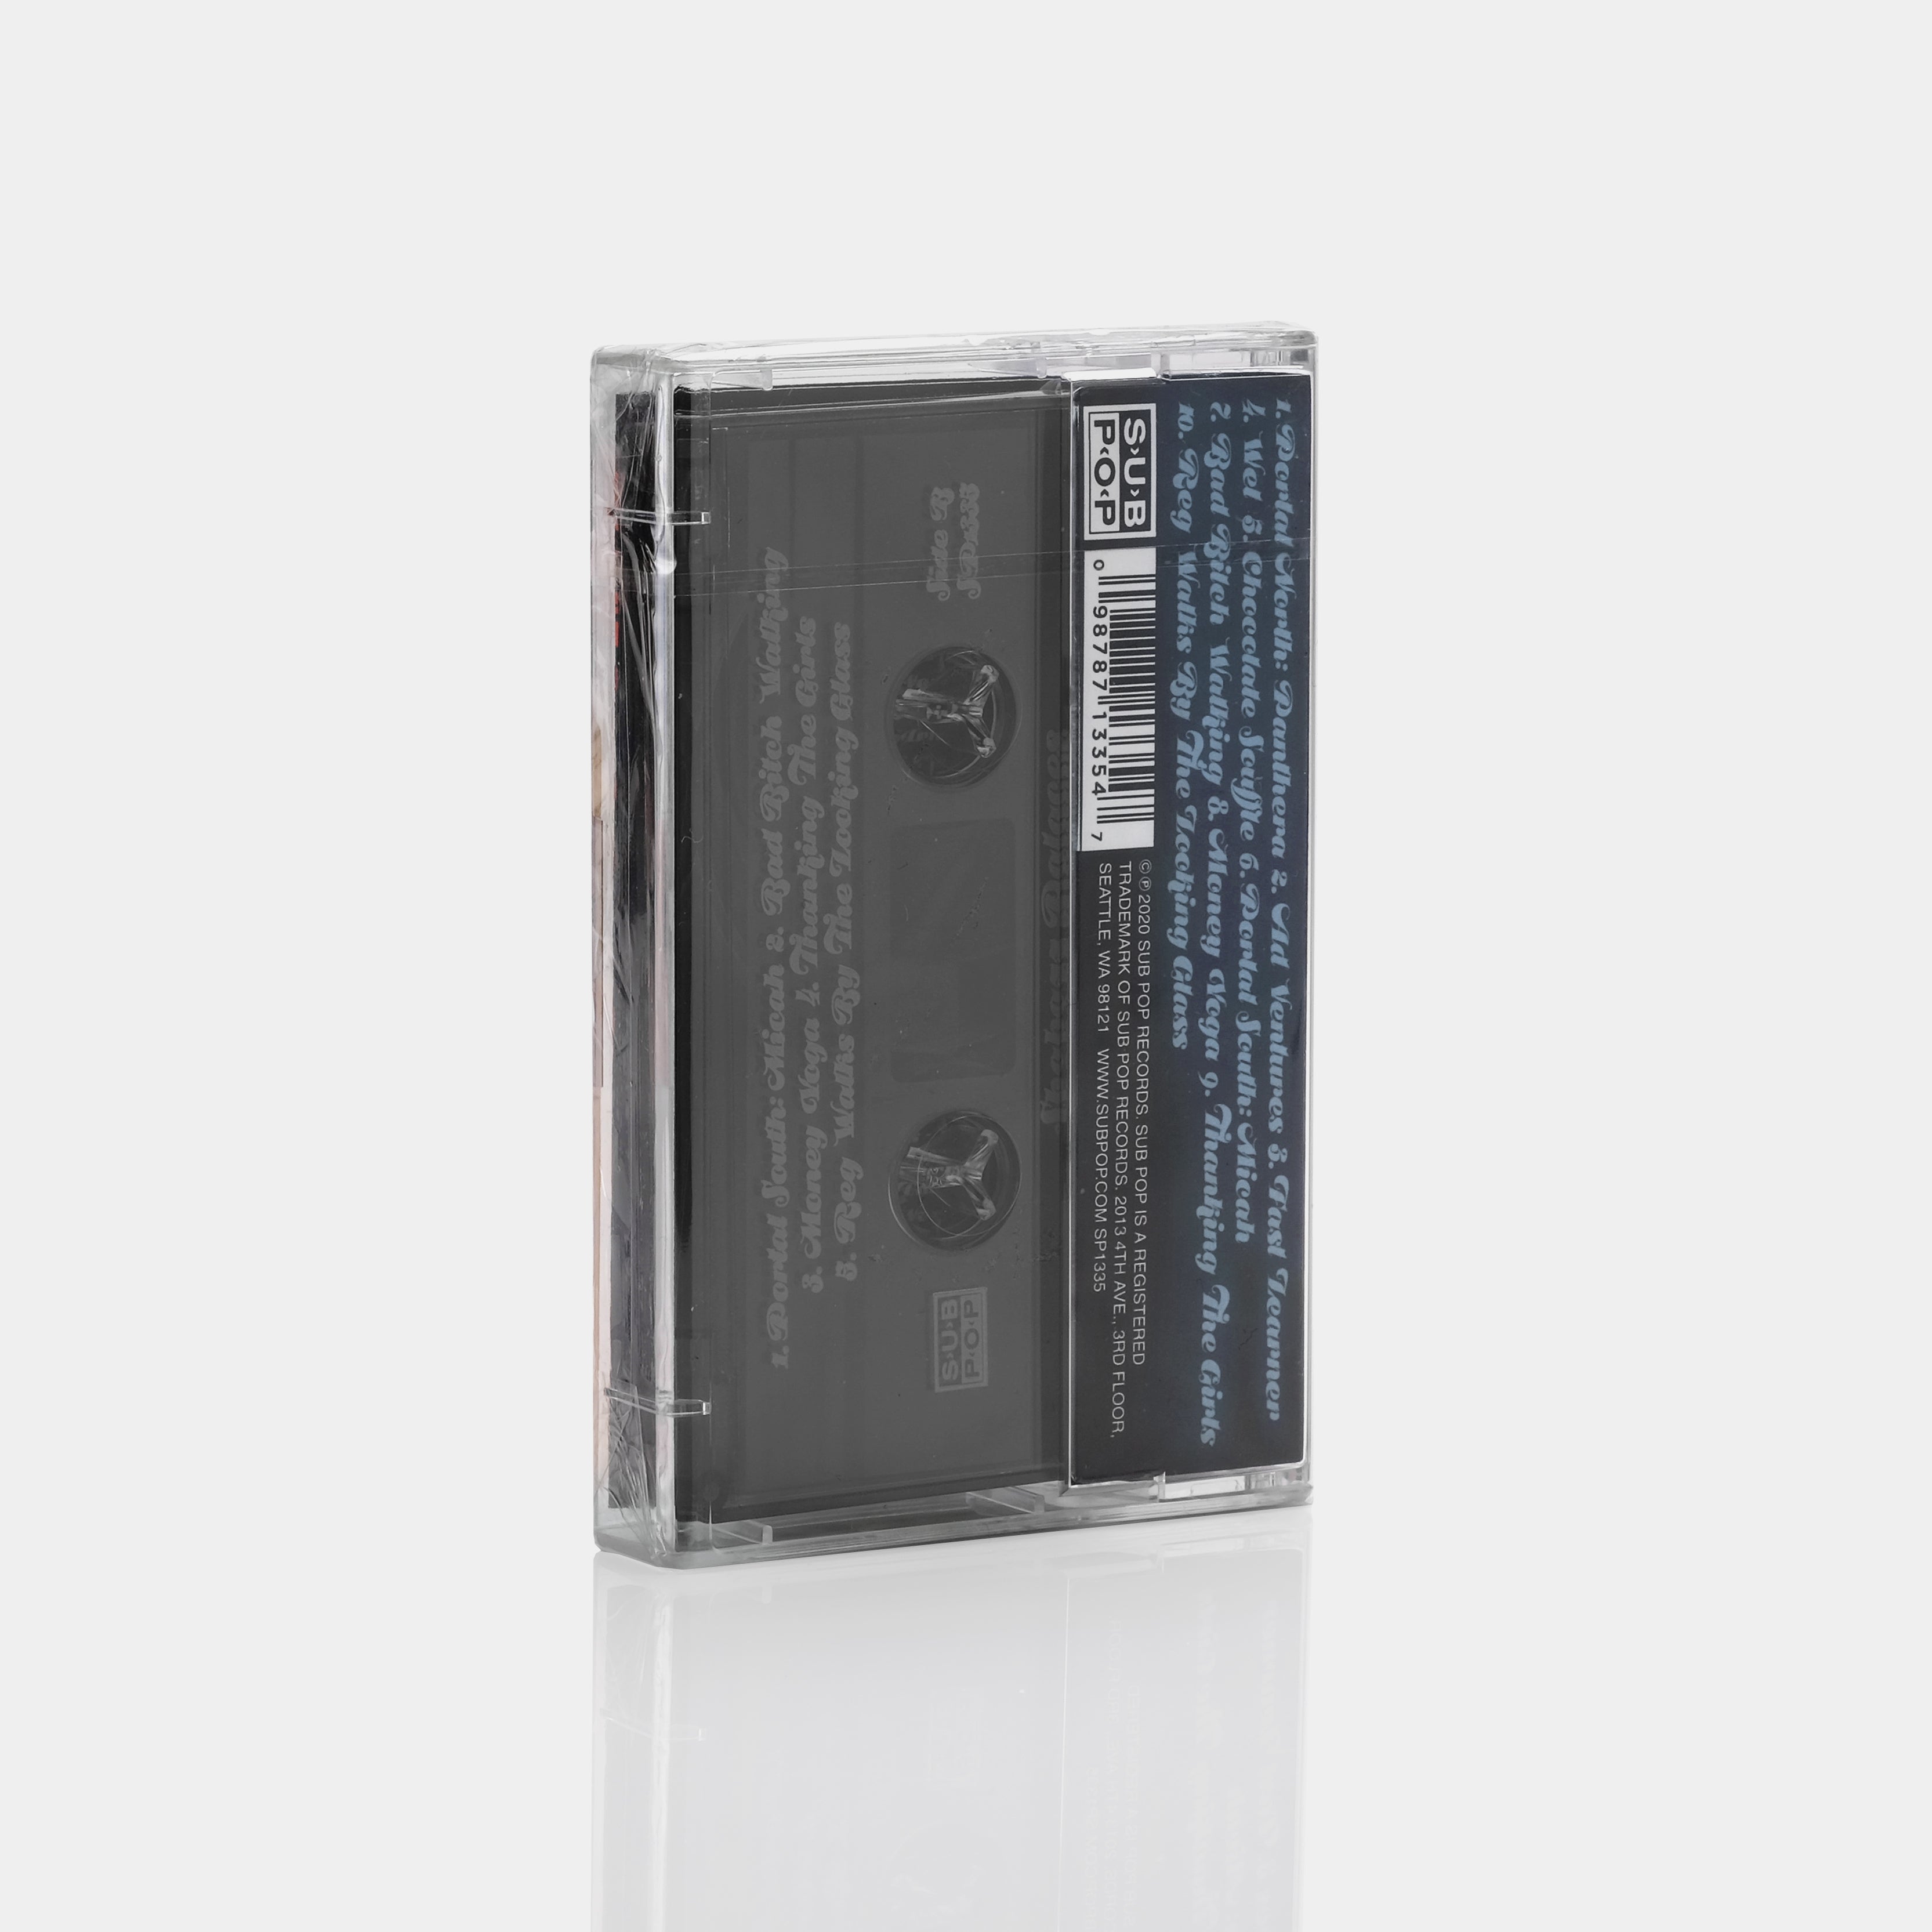 Shabazz Palaces - The Don Of Diamond Dreams Cassette Tape